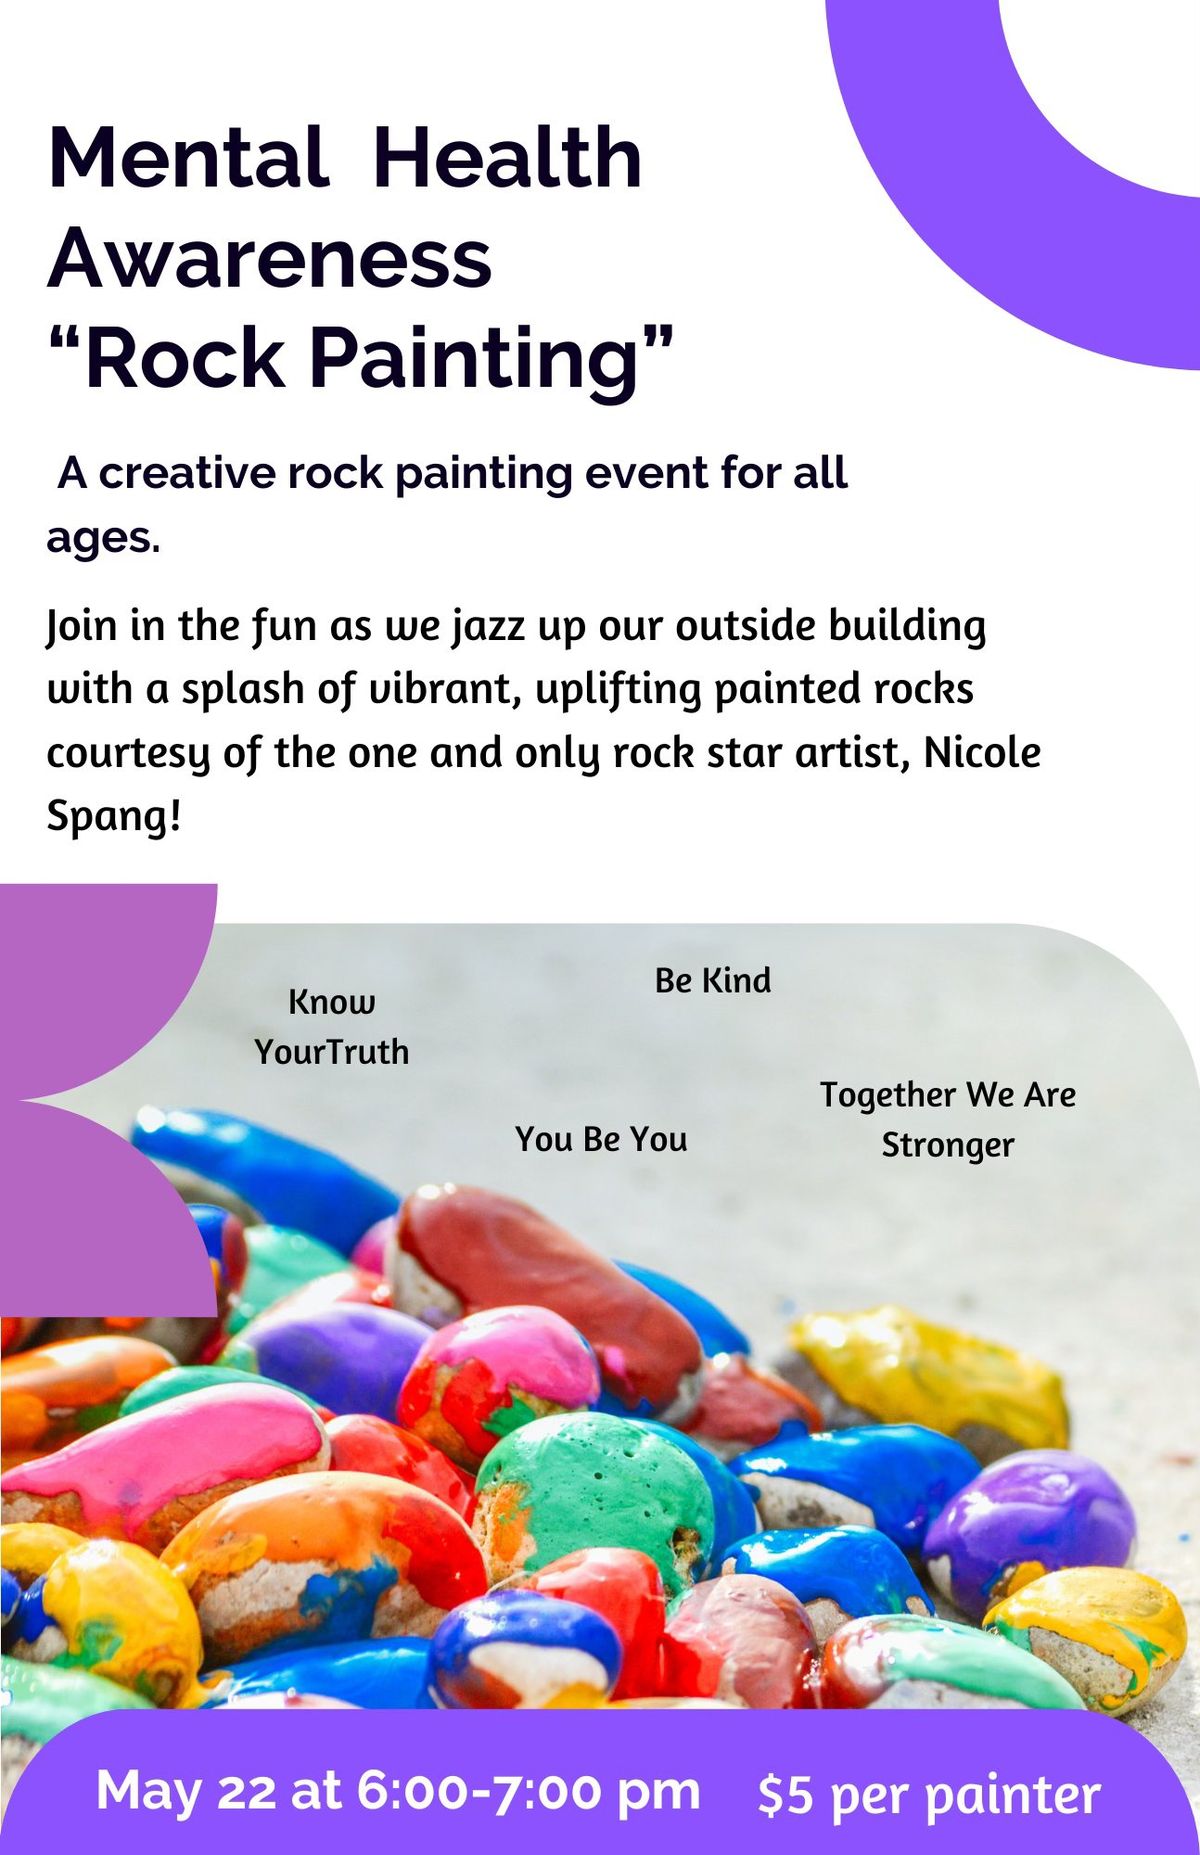 Rock Painting for Mental Awareness month